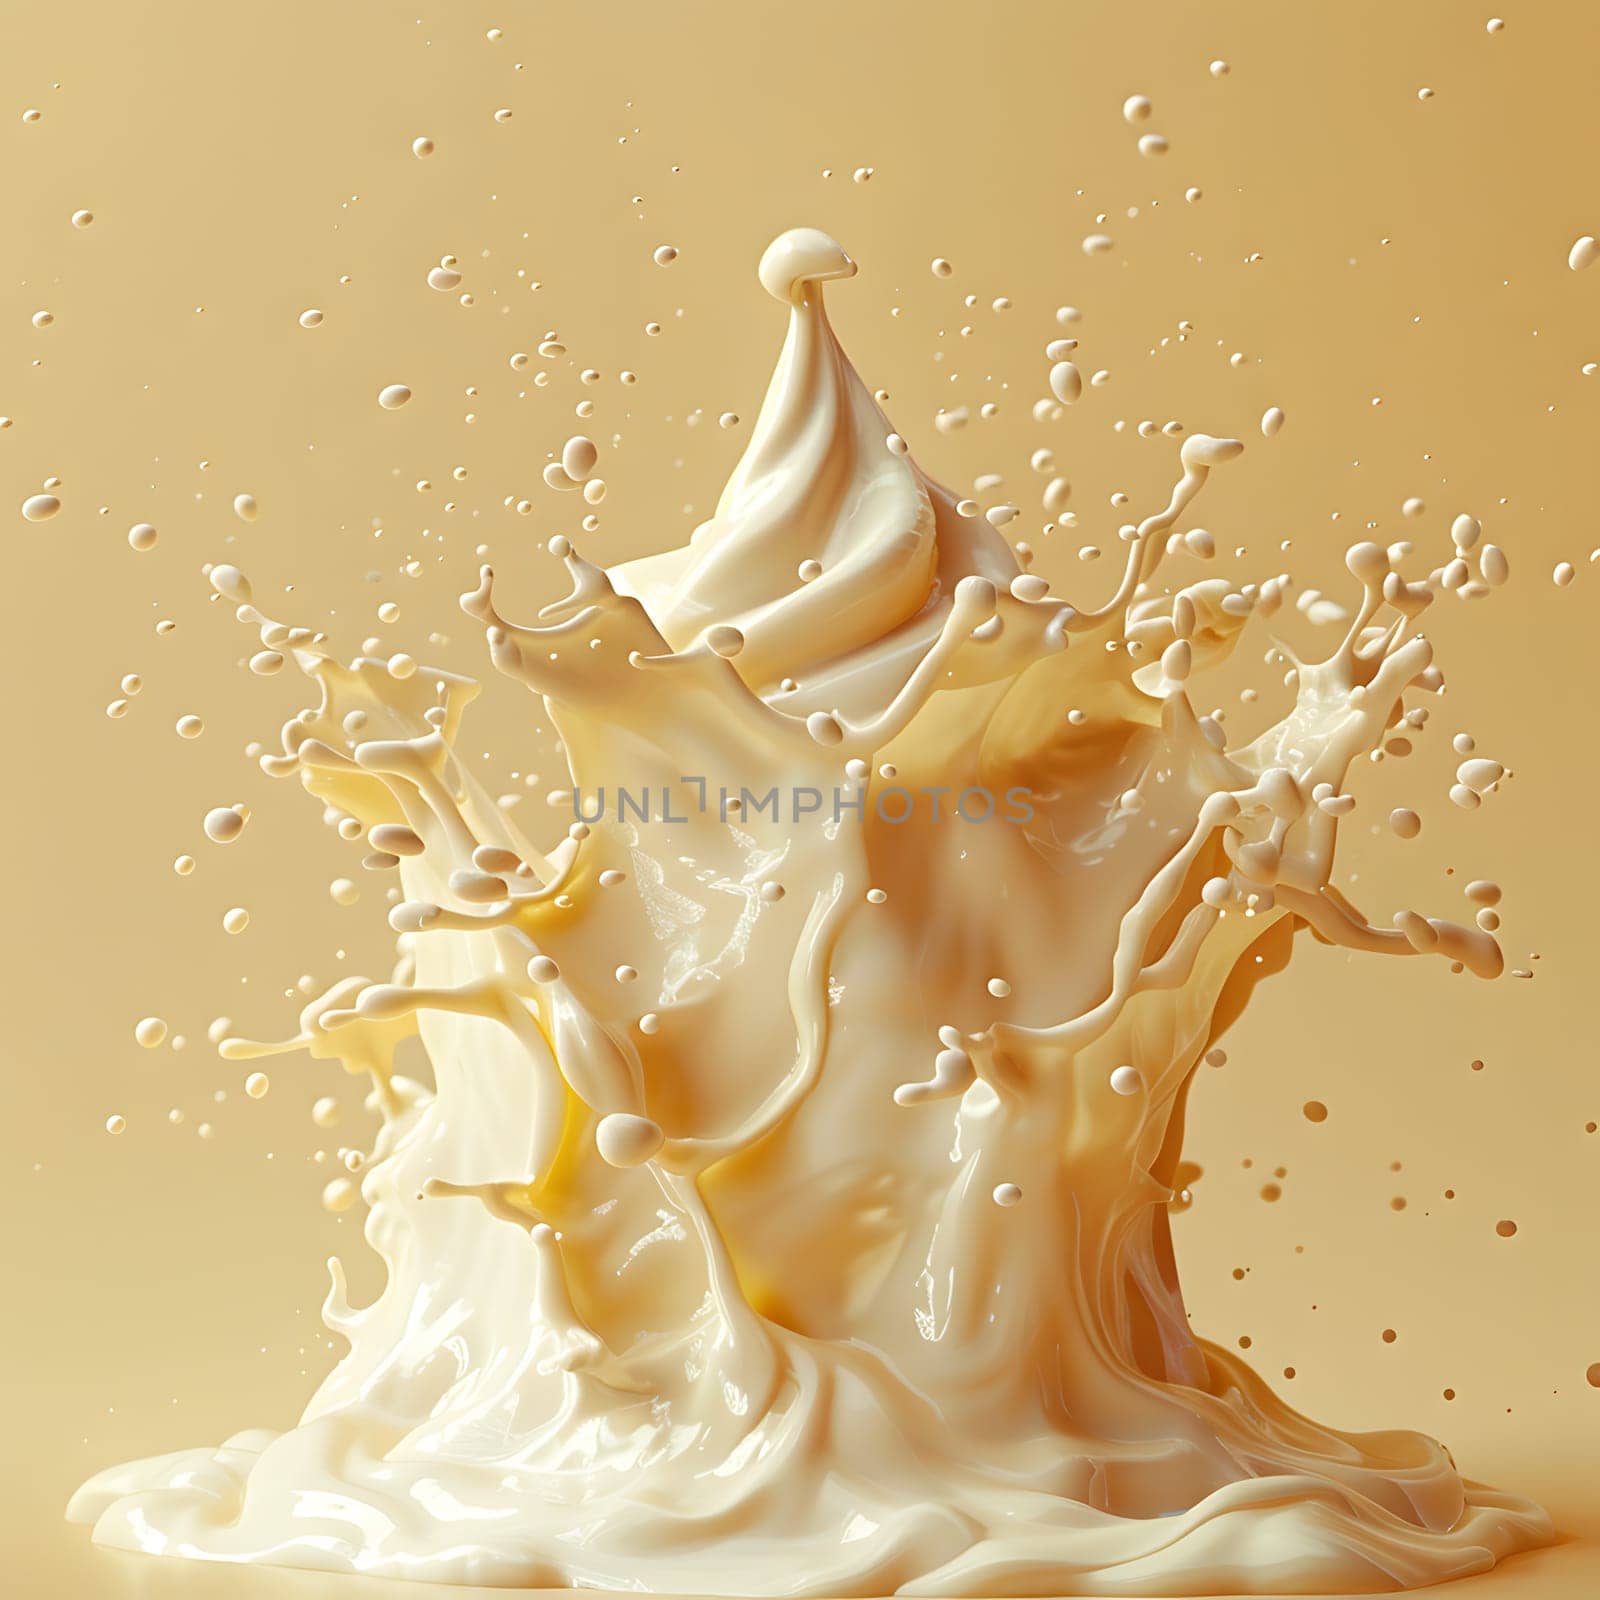 A mesmerizing macro photography image capturing a splash of white liquid against a vibrant yellow background, highlighting the fluidity and beauty of this culinary ingredient. A true art in cuisine